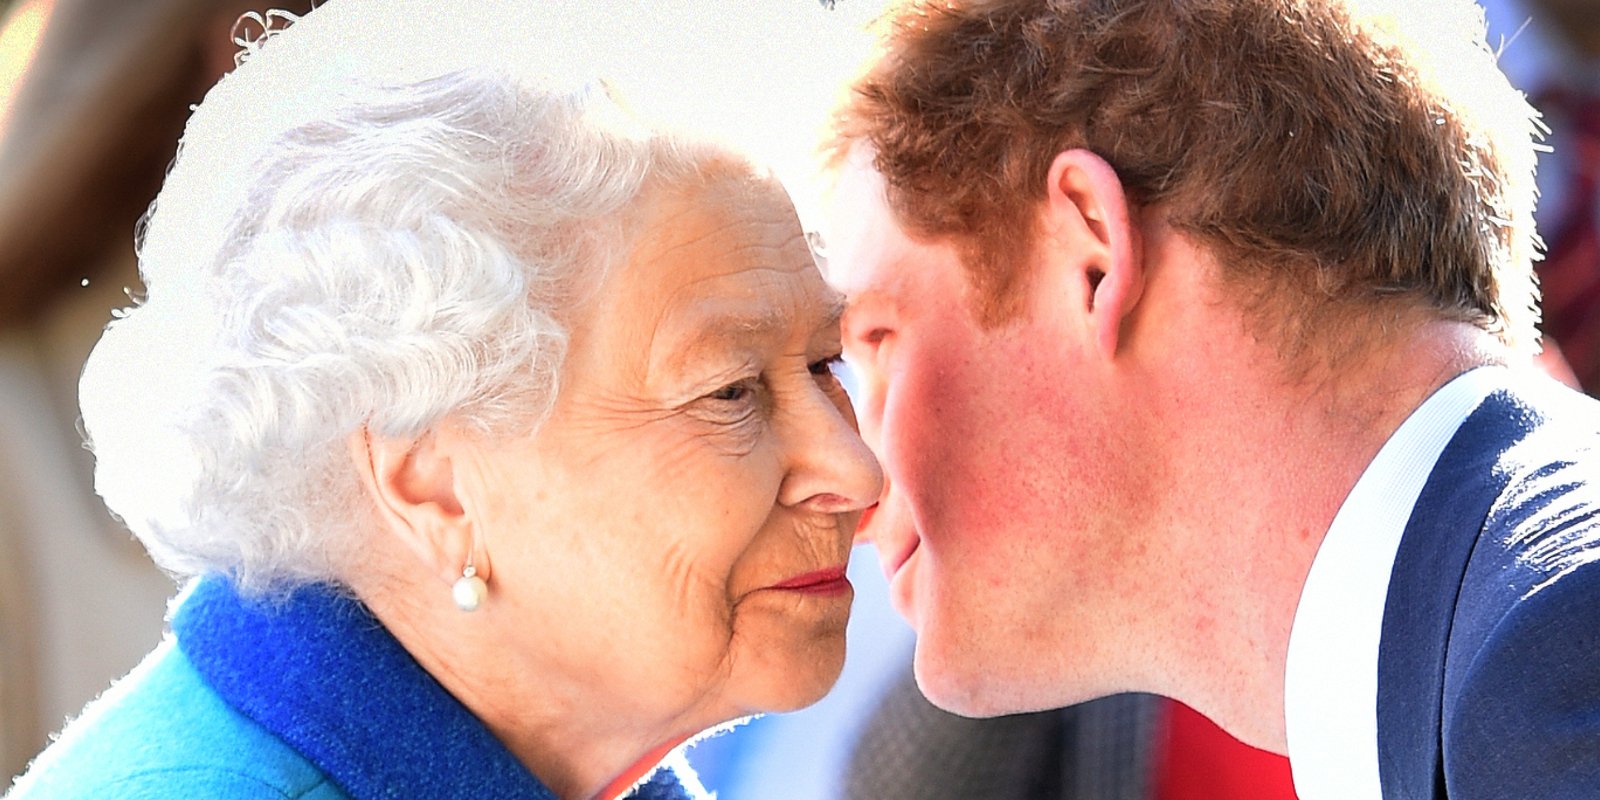 Queen Elizabeth and Prince Harry pose for a photograph at Royal Hospital Chelsea on May 18, 2015 in London, England.